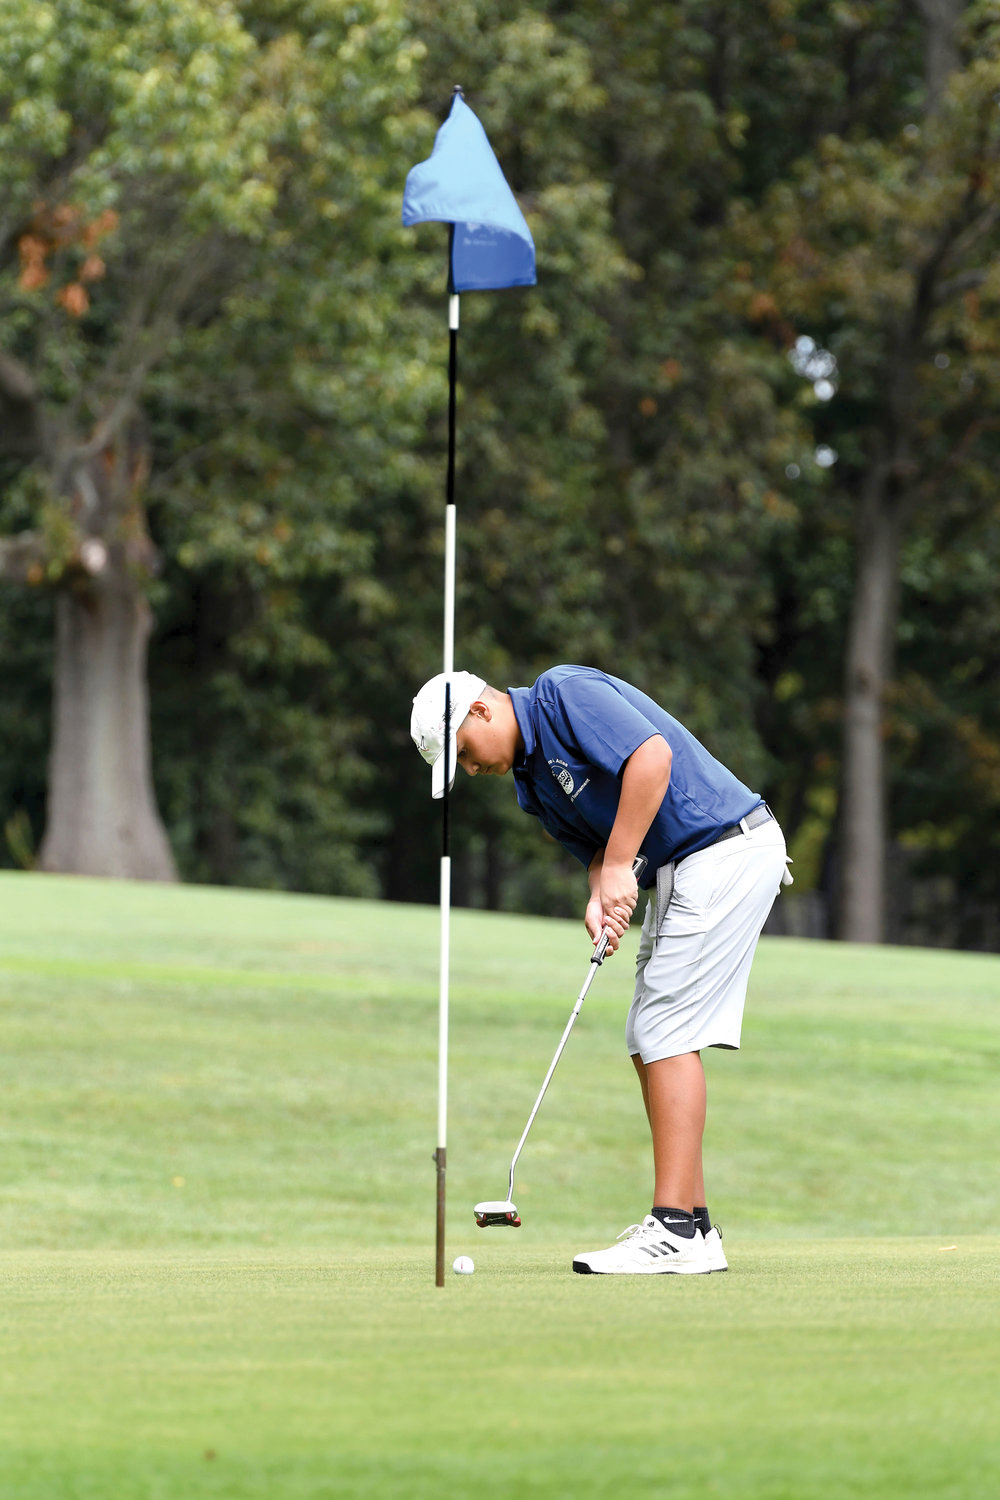 Michael Hui watches the ball head toward the eighth hole during the Dr. Theodore A. Atlas CYO Junior Golf Tournament at Silver Lake Golf Course on Staten Island Sept. 3. Hui and his teammates from Intermediate School 34 won the team championship.